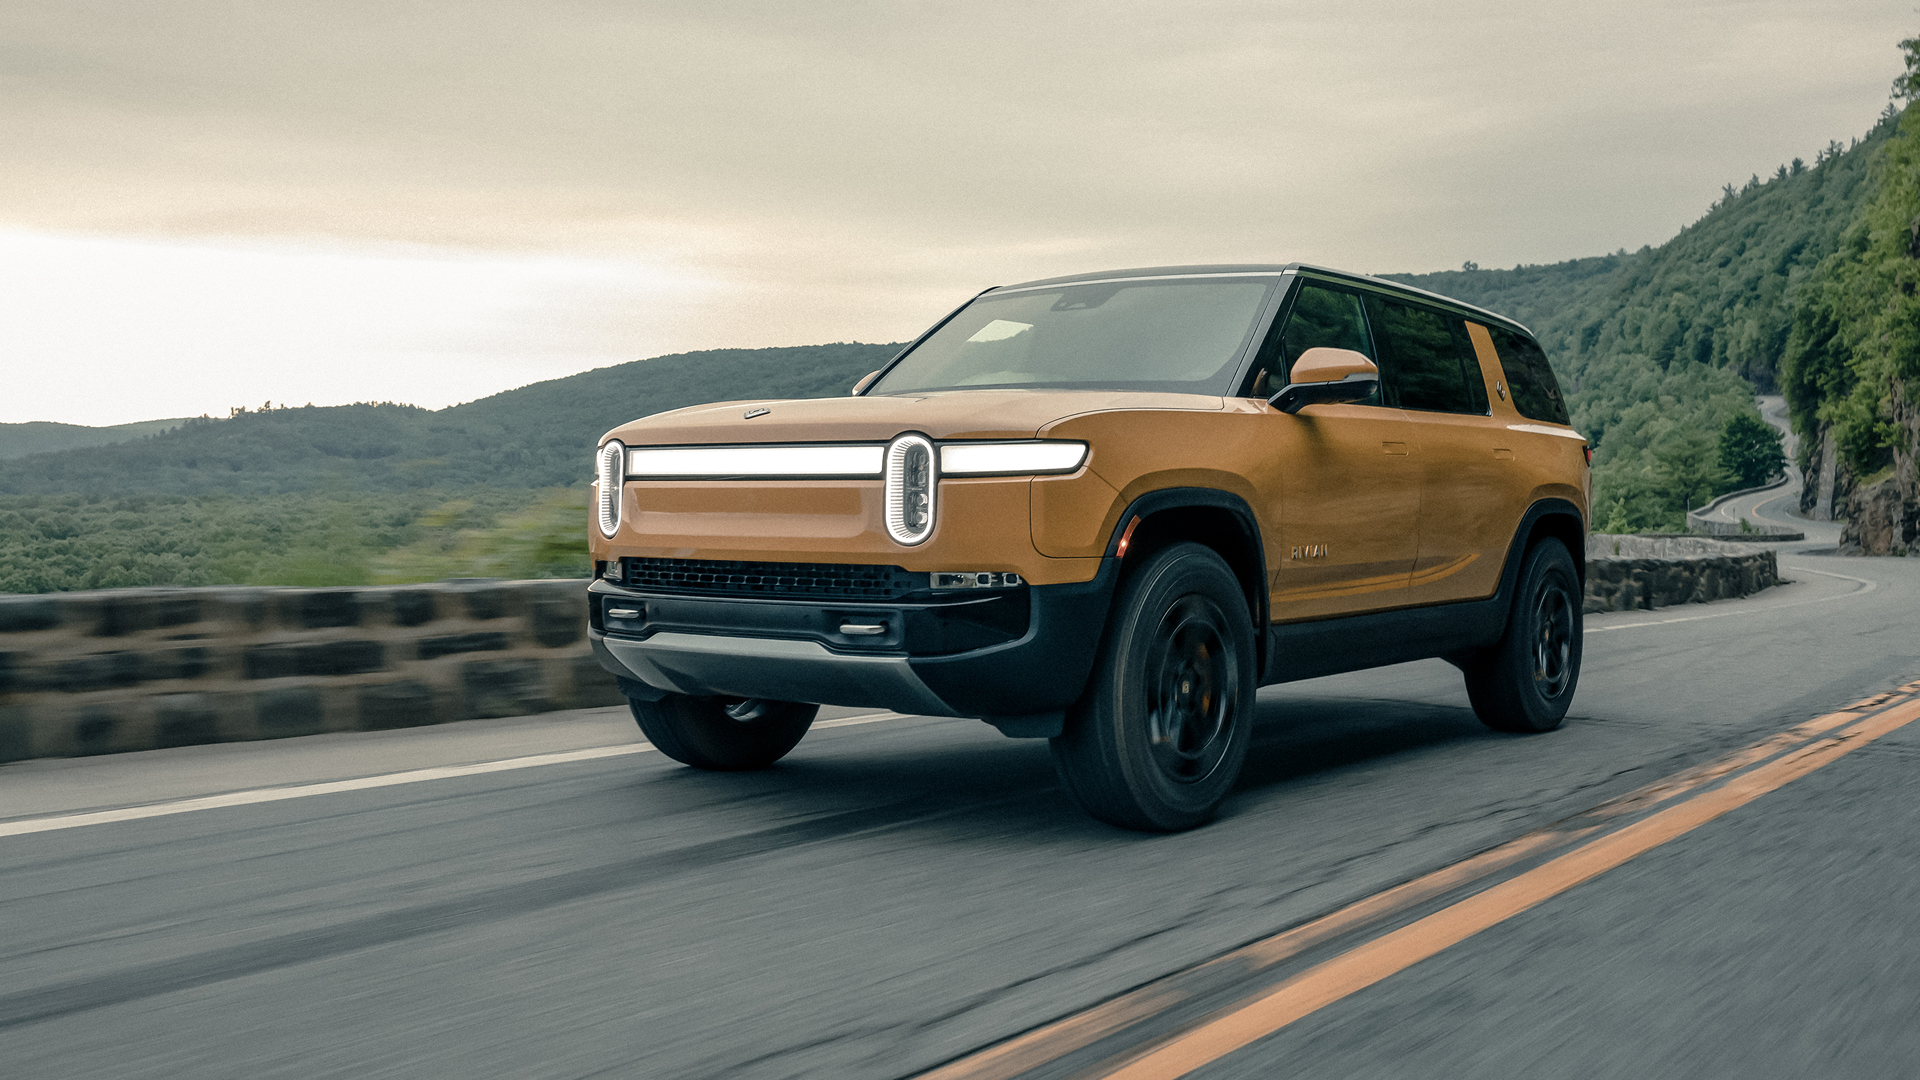 Rivian R1S First Drive Review The SUV finally arrives! (Sort of